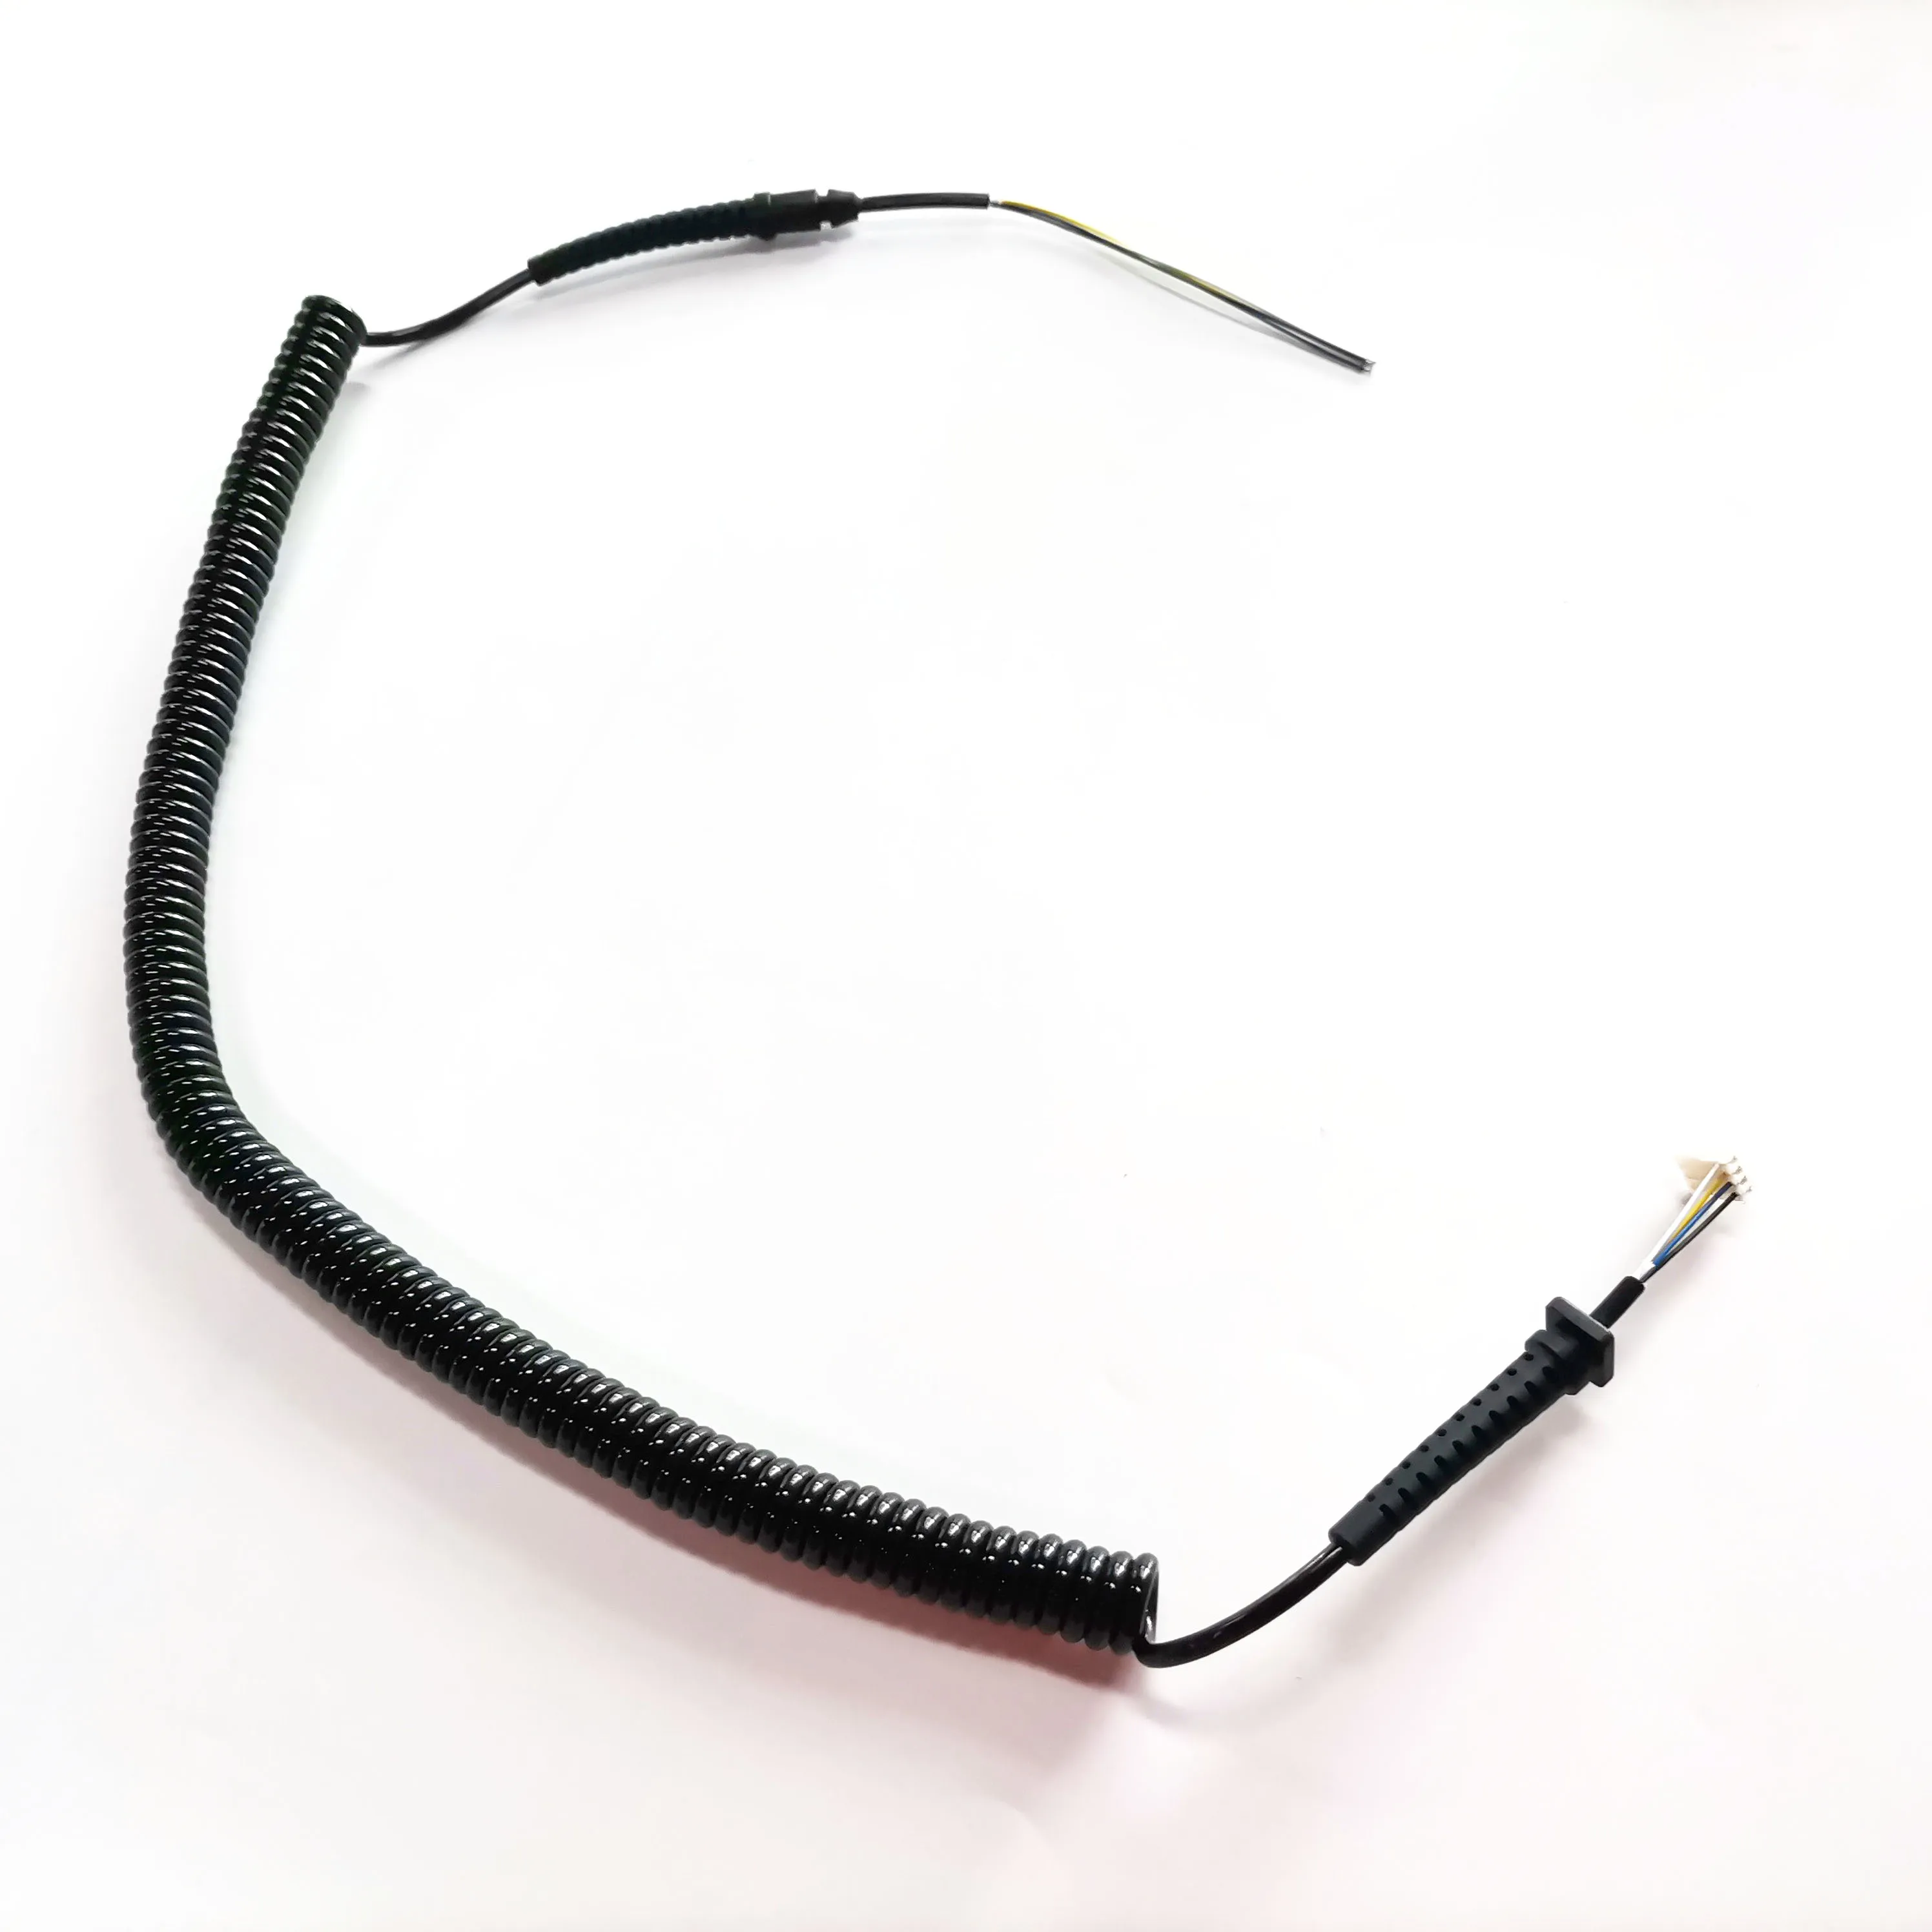 4 Core 24awg retractable PU Coiled Flexible Extension Spiral Cable wire harness